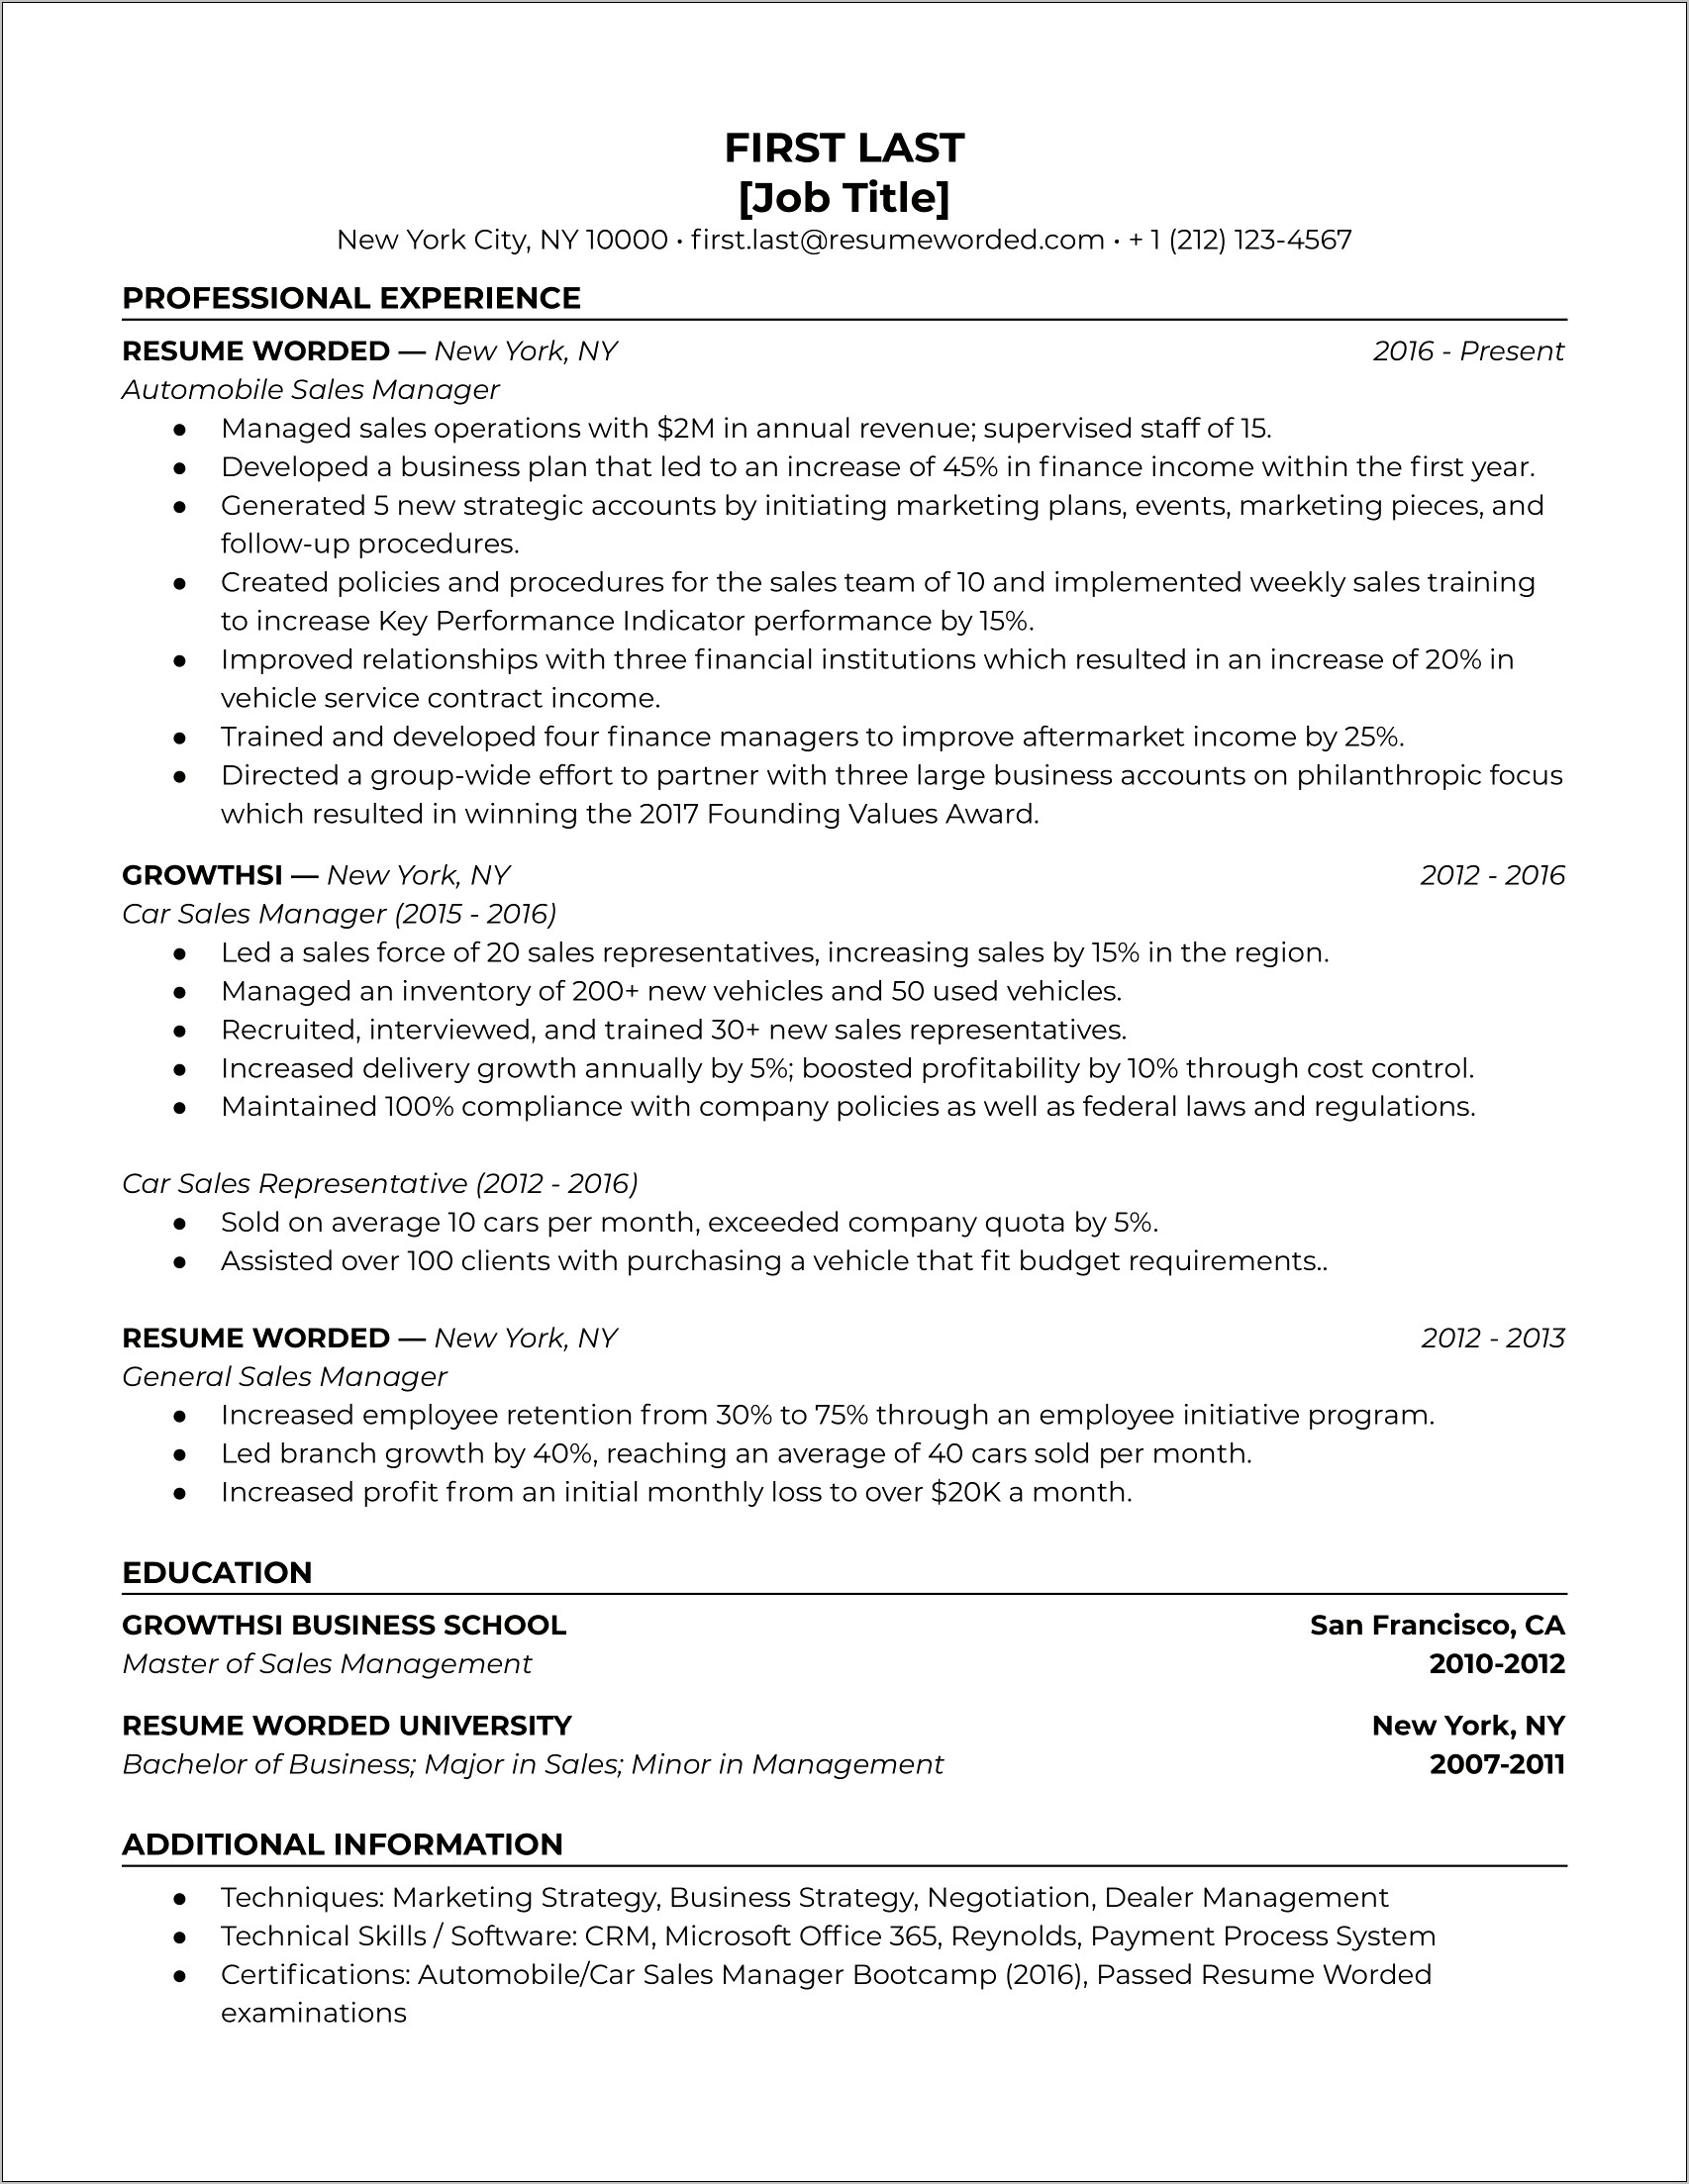 Hotel Director Of Sales Resume Examples